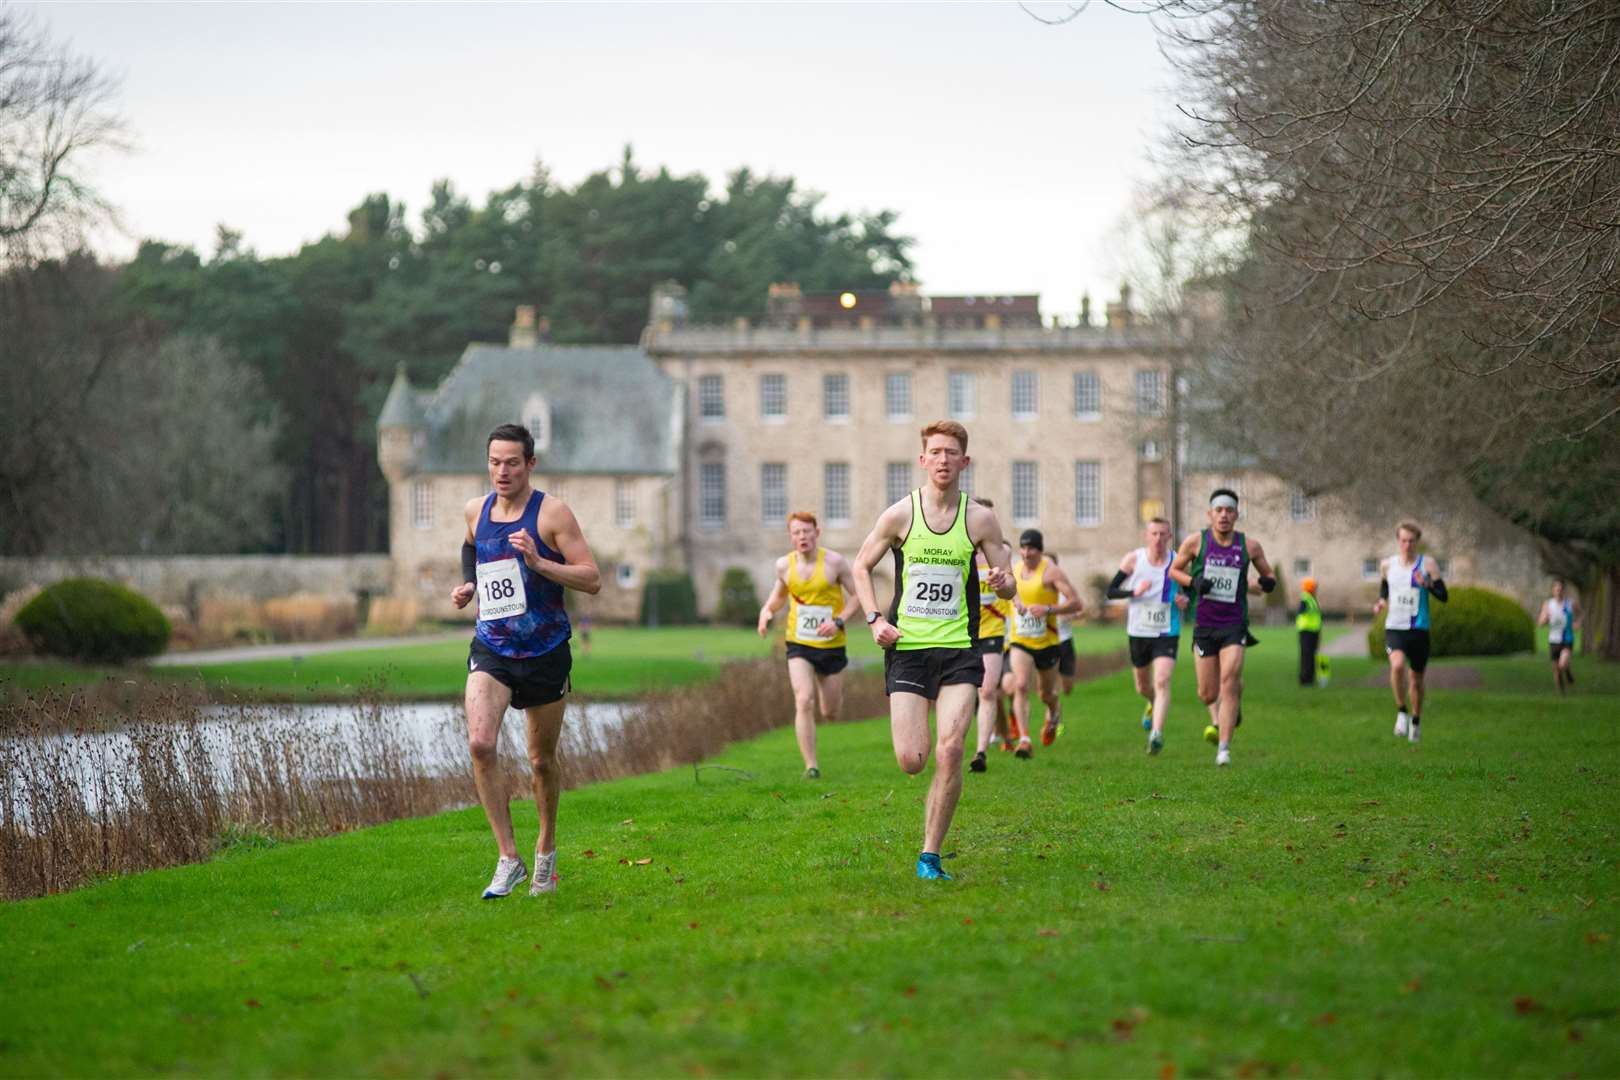 The final race of the afternoon - the senior and under 20's men make their way around the cross country track. Picture: Daniel Forsyth